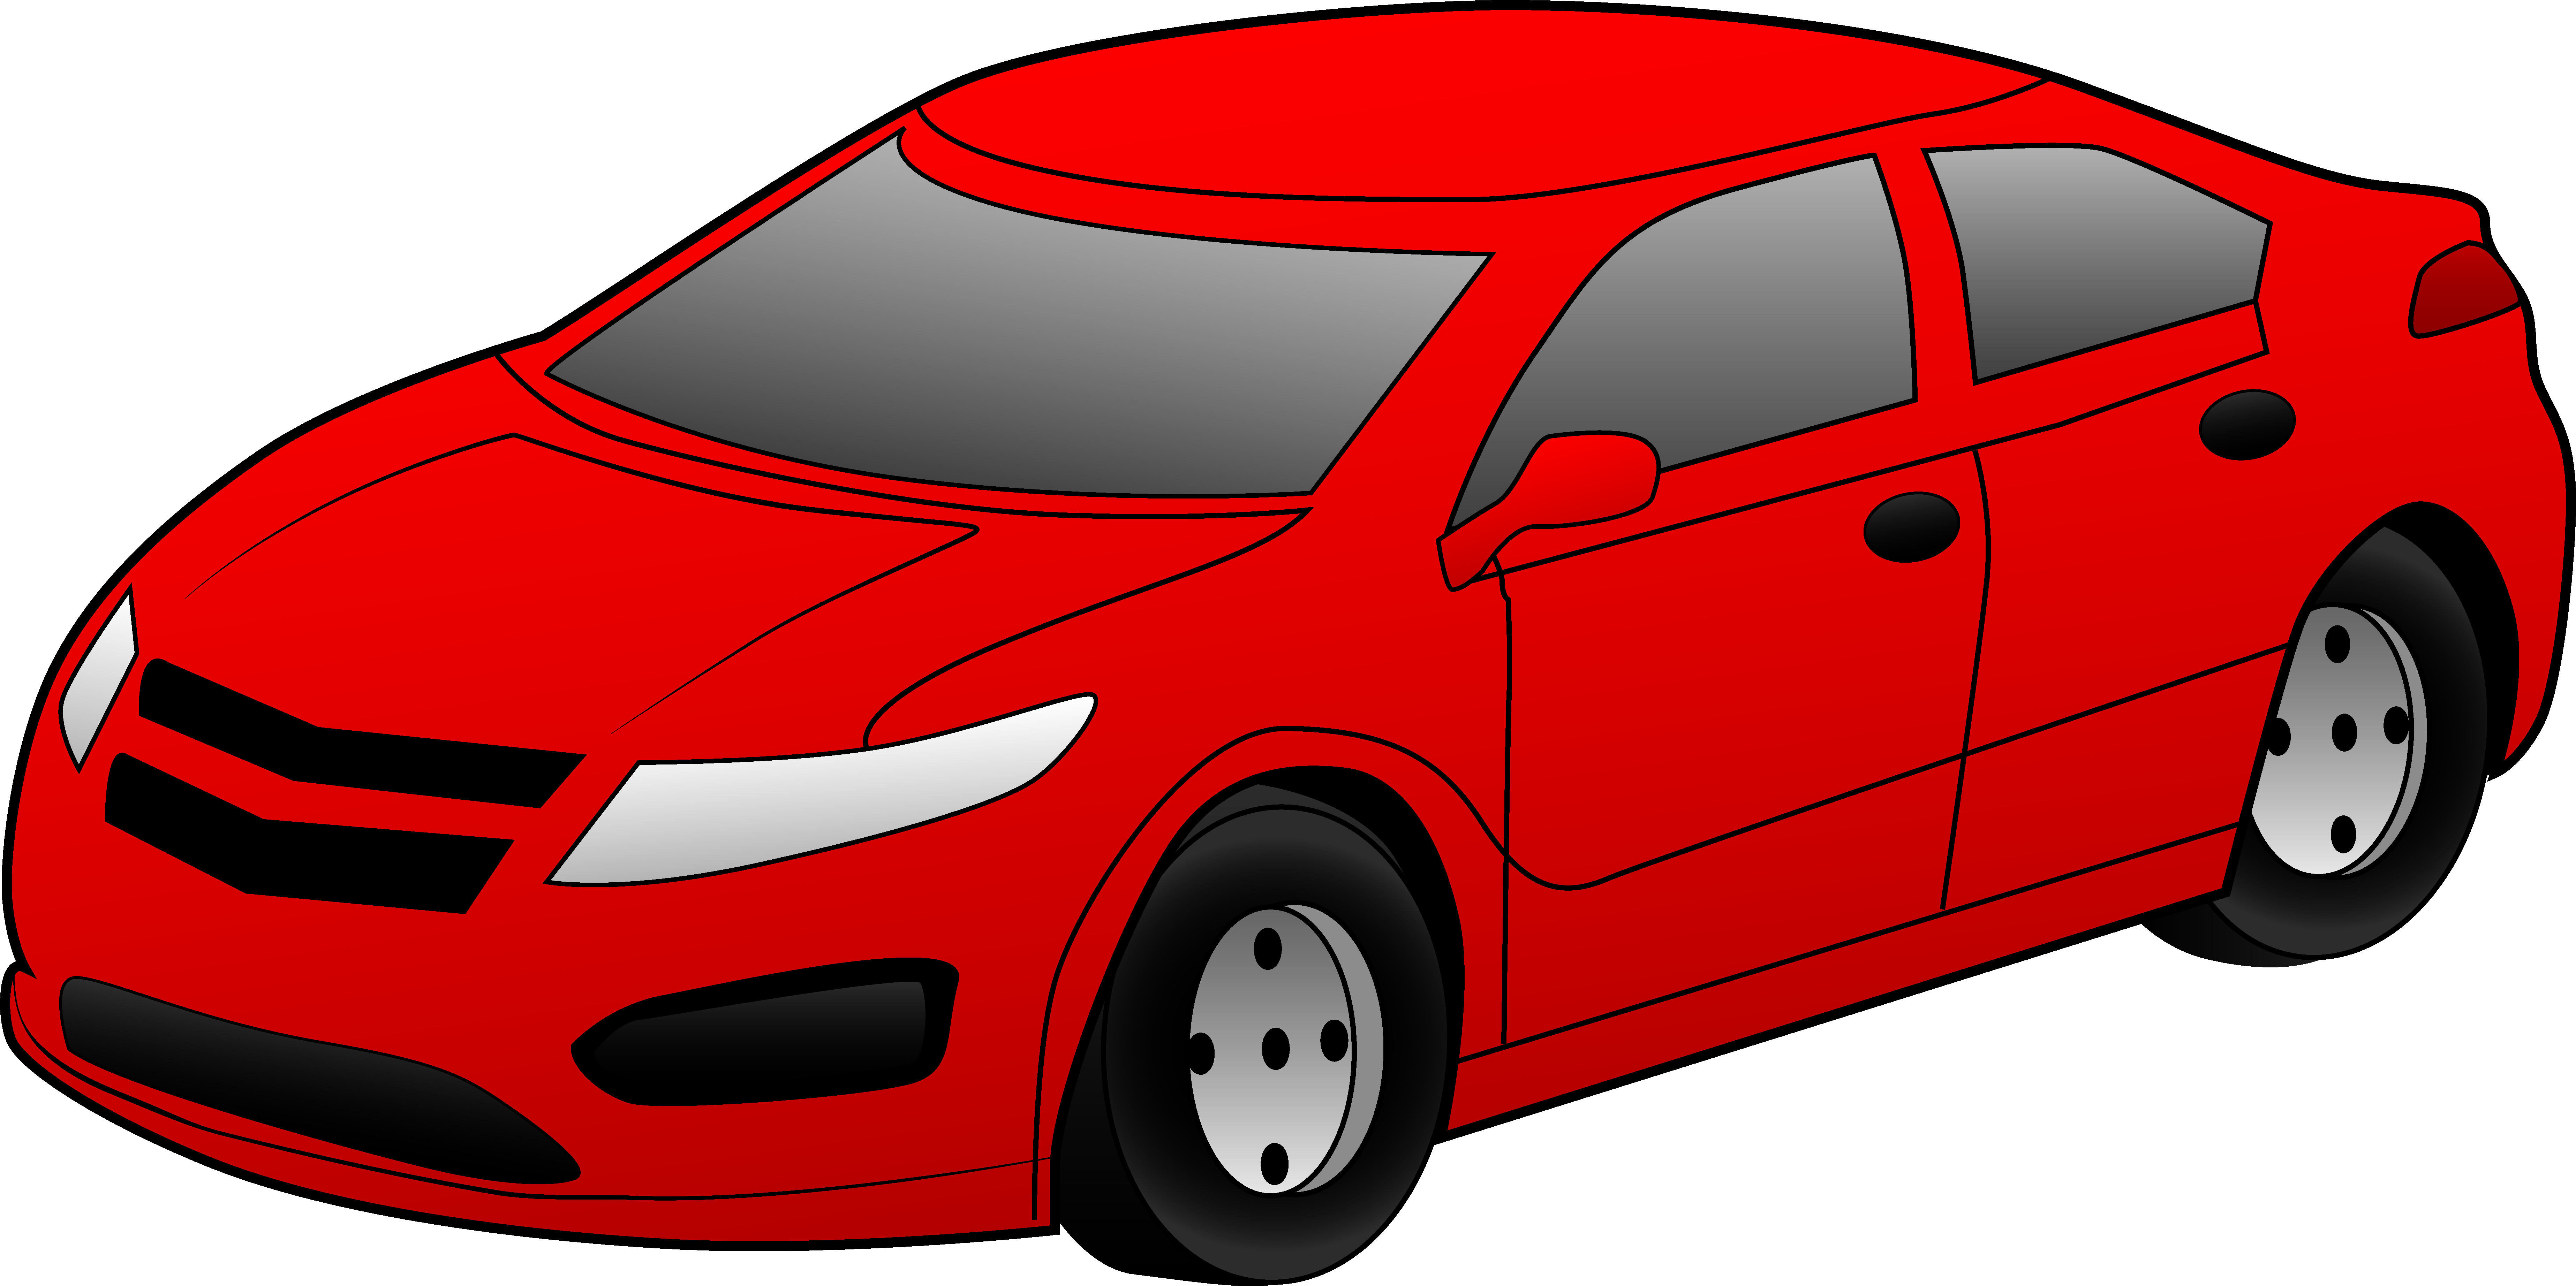 Car Images Free | Free Download Clip Art | Free Clip Art | on ...